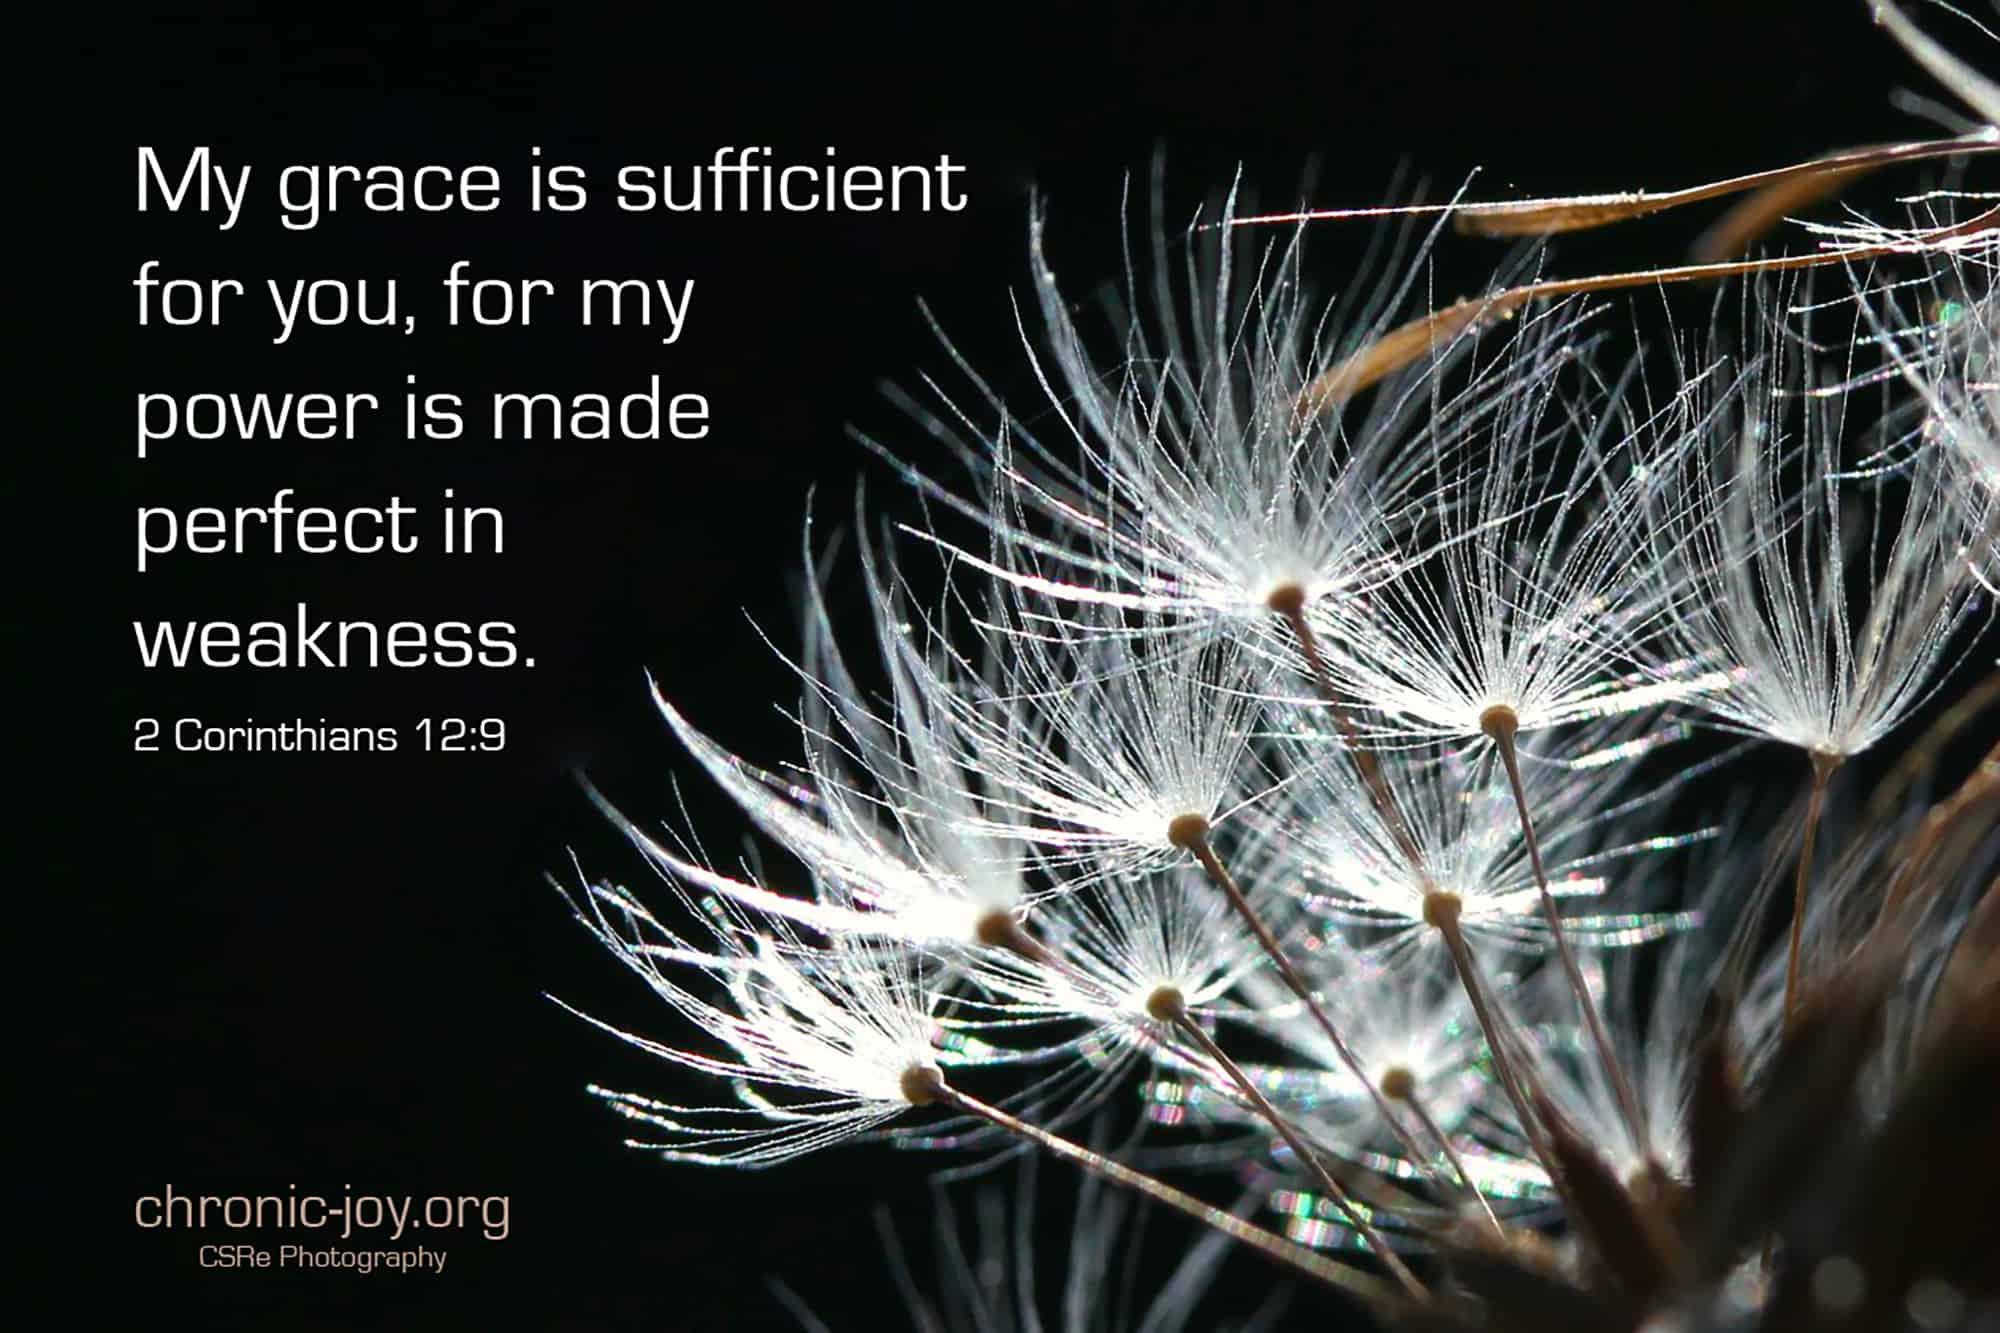 My grace is sufficient for you...